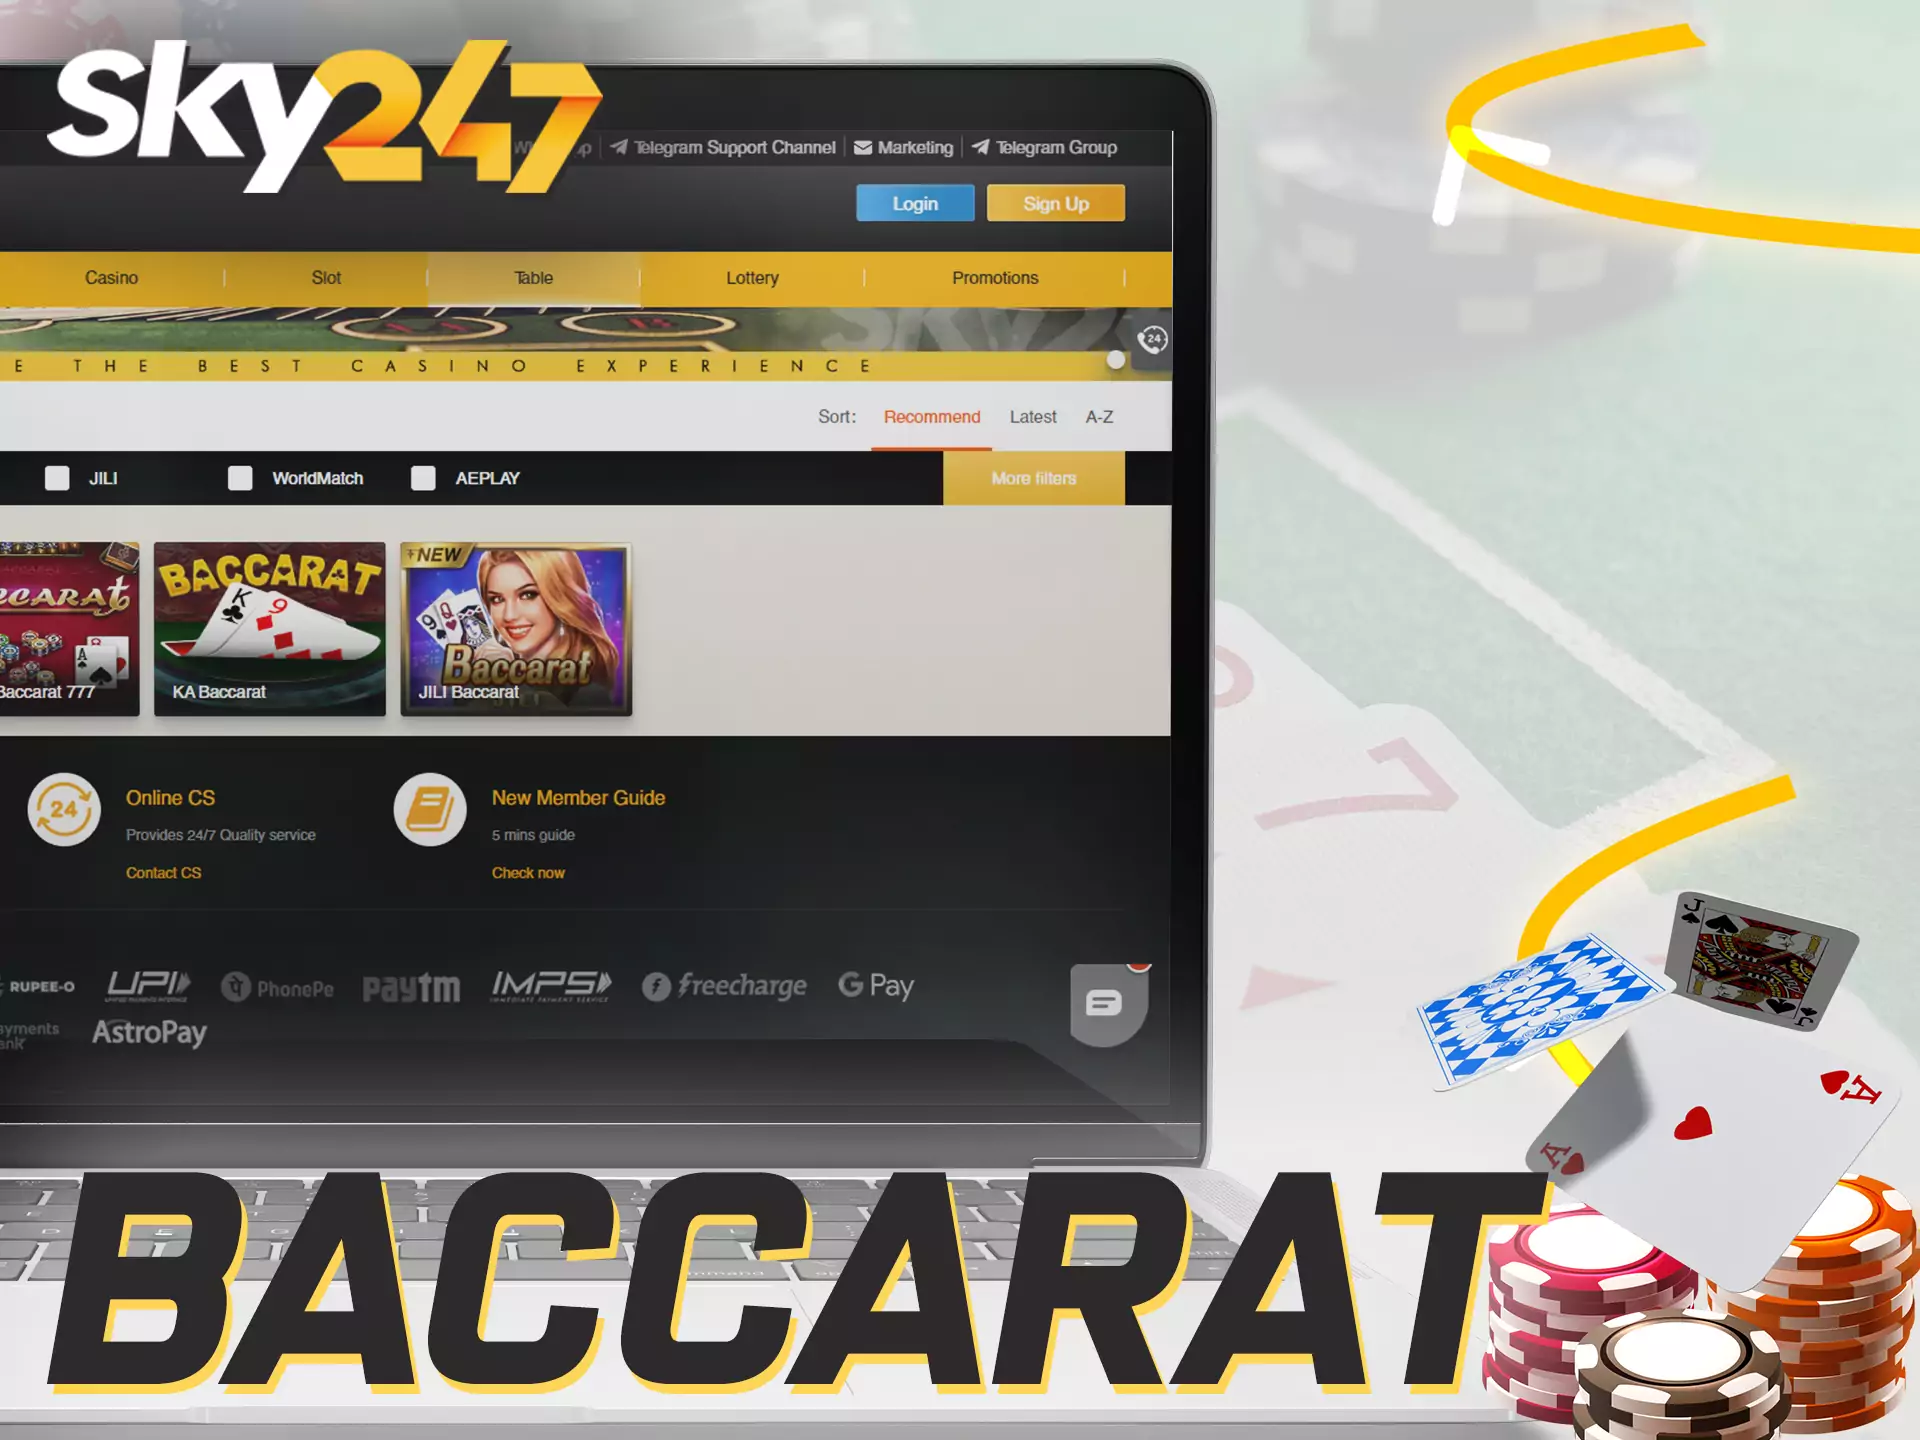 You can play baccarat online on Sky247.